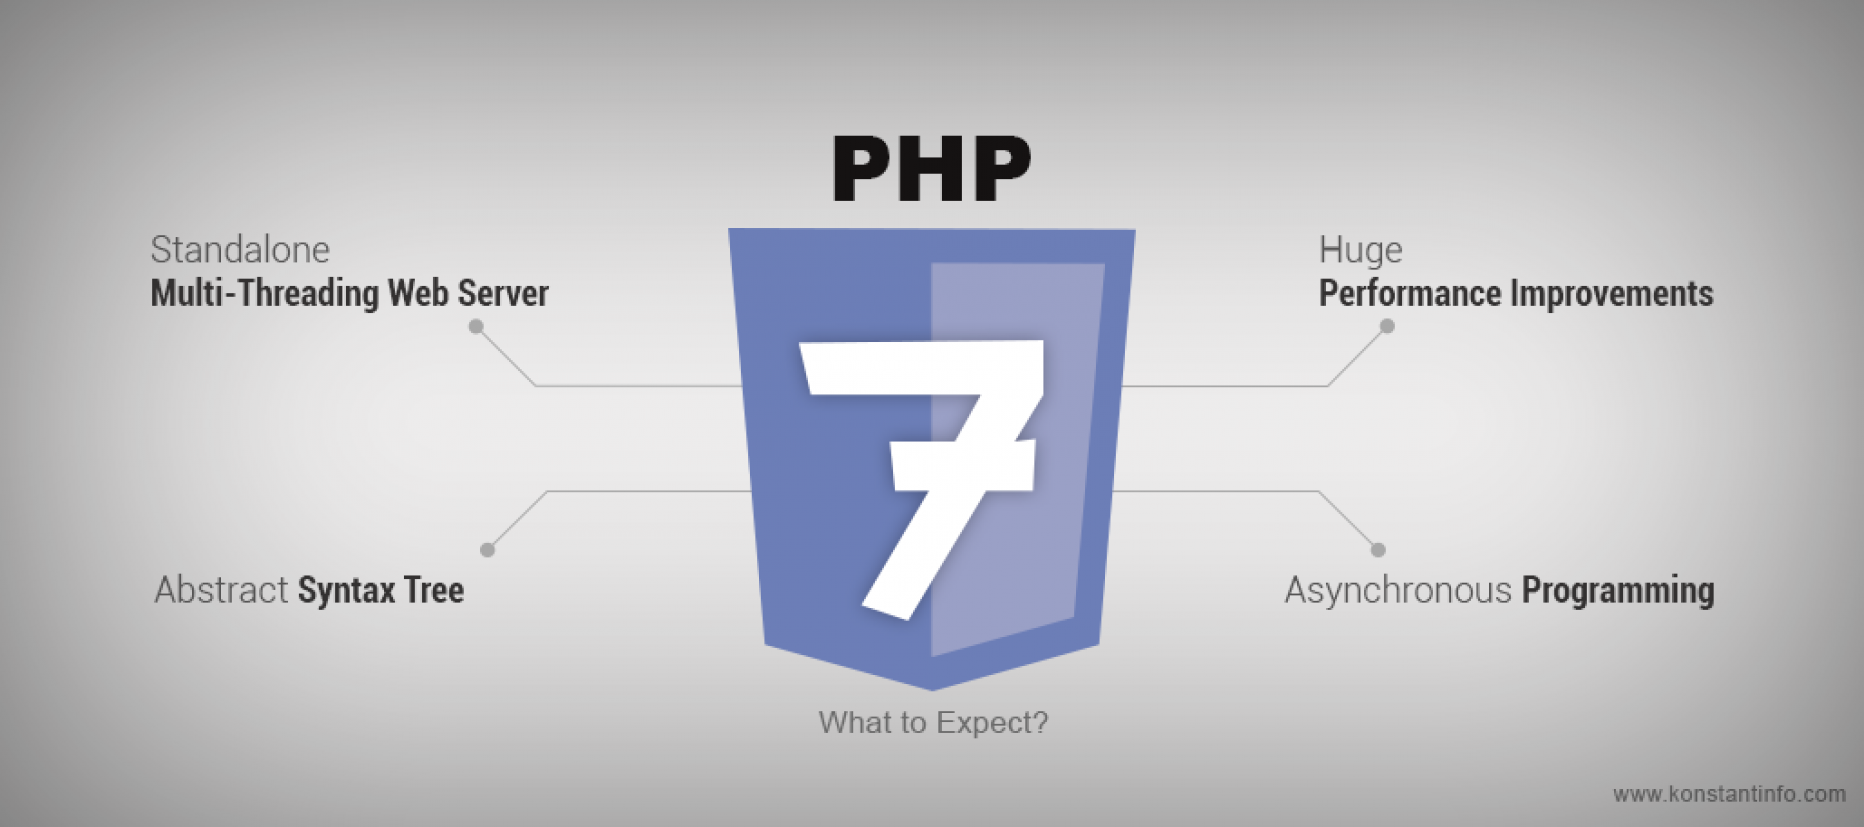 Php new com. Php. Php 7. Php картинка. Значок php.